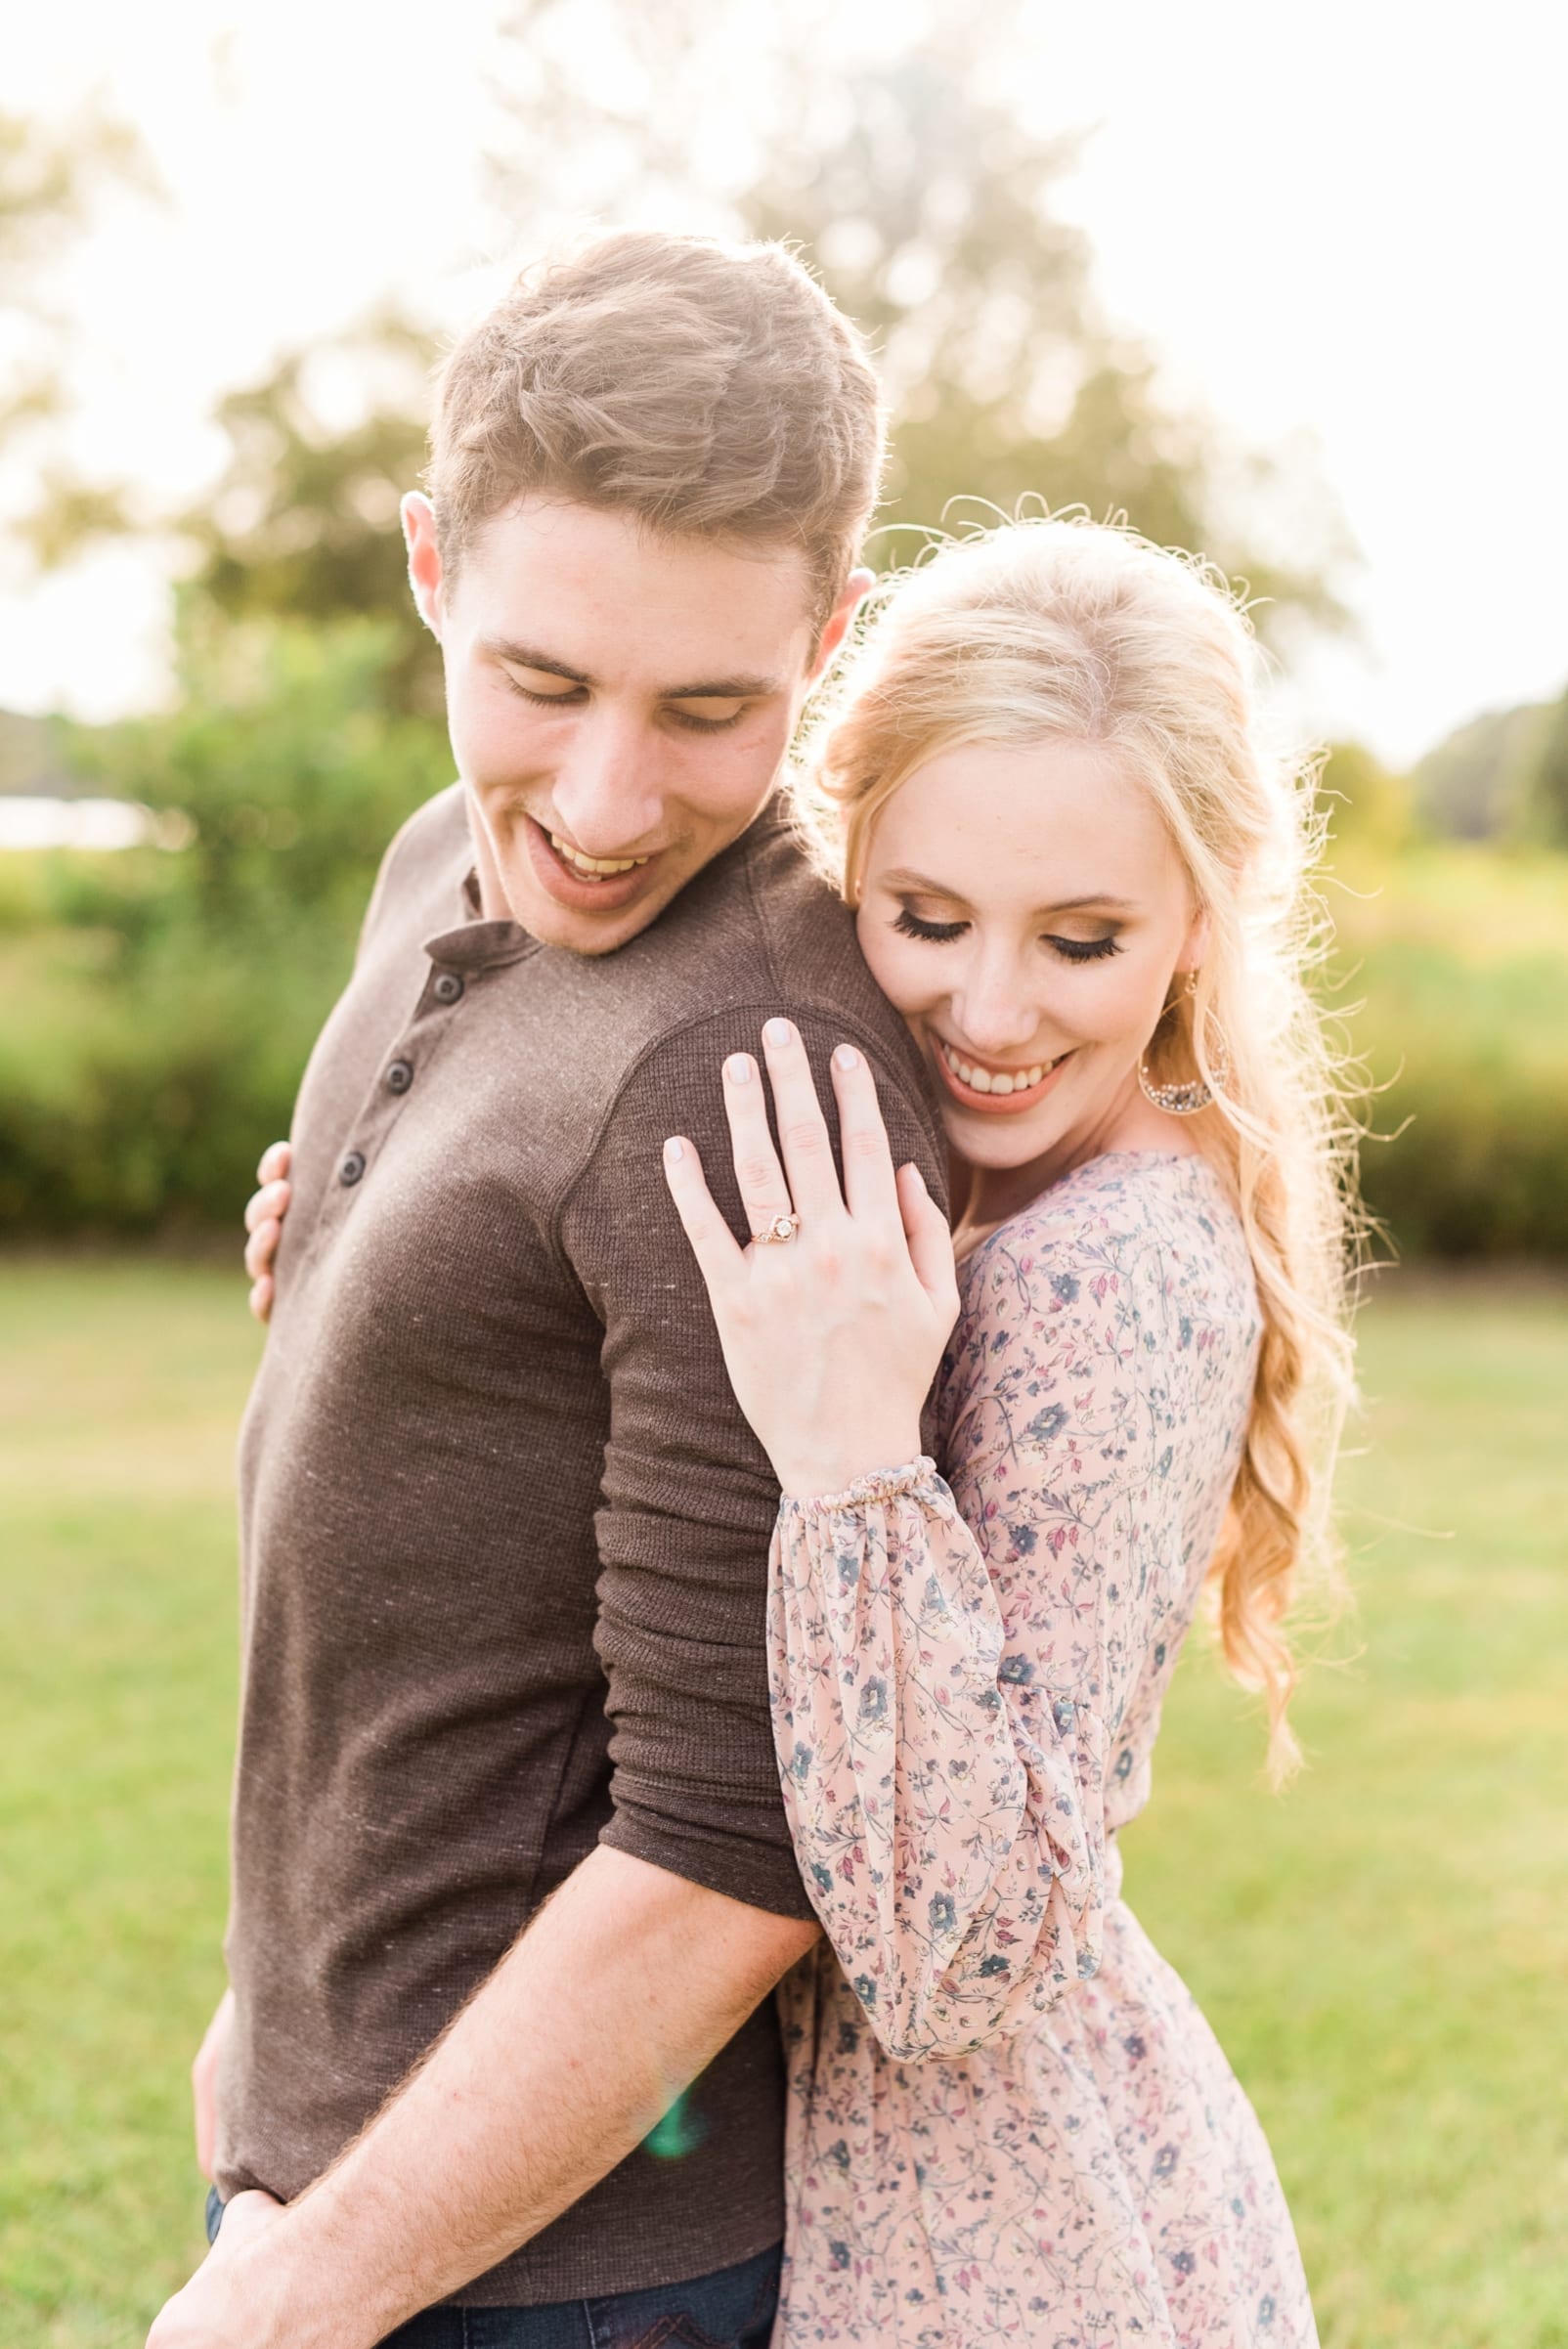 NC engaged couple laughing during their portraits photo